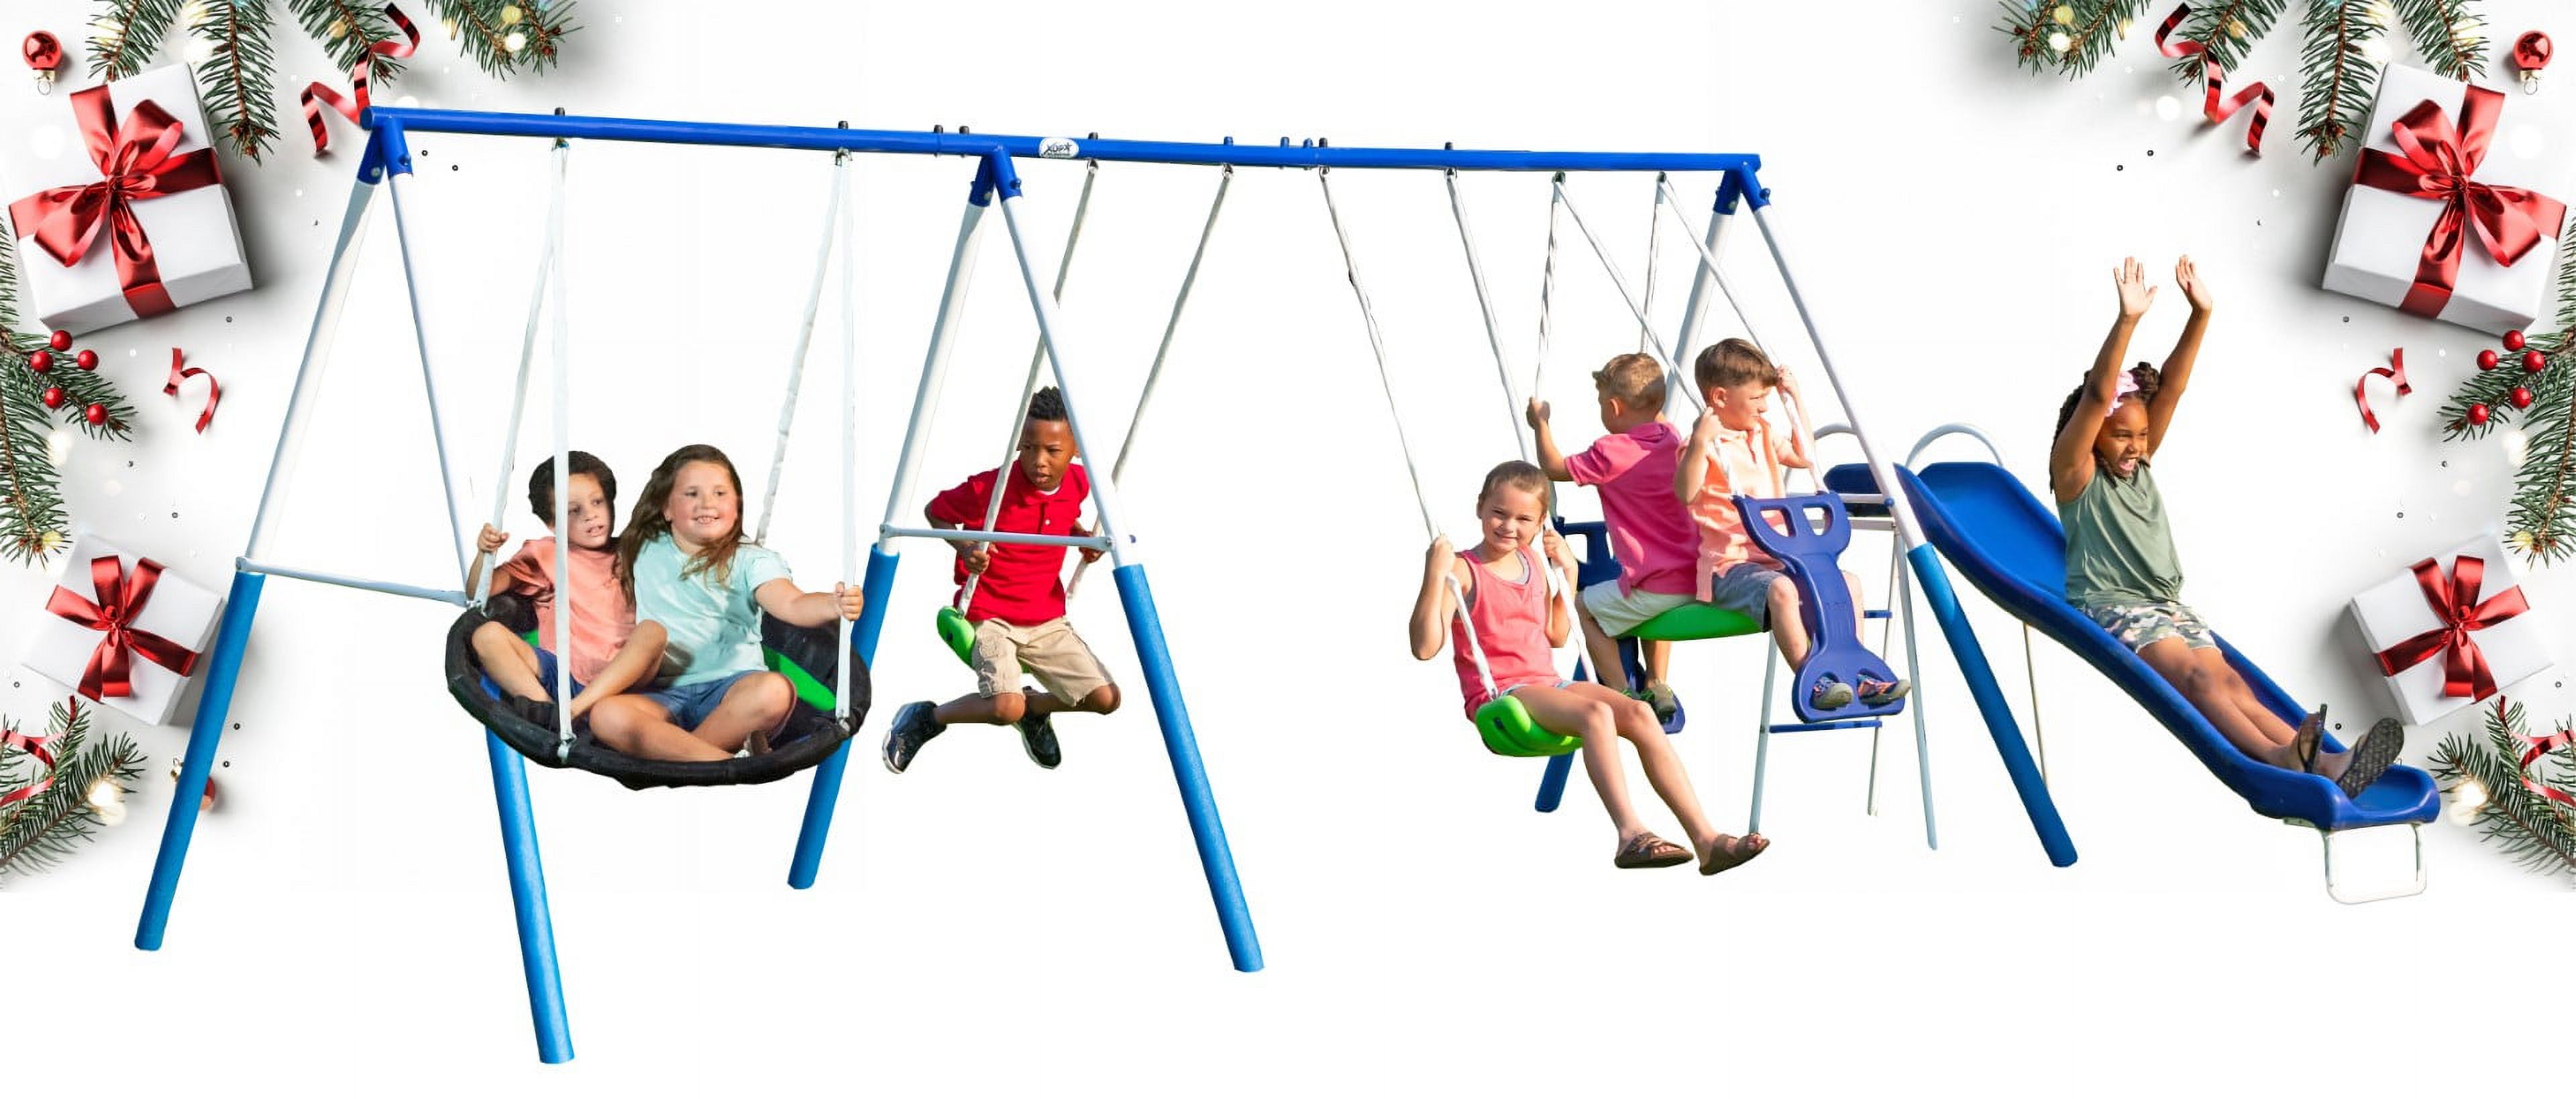 XDP Recreation All Star Playground Metal Swing Set for up to 7 Children - image 2 of 13